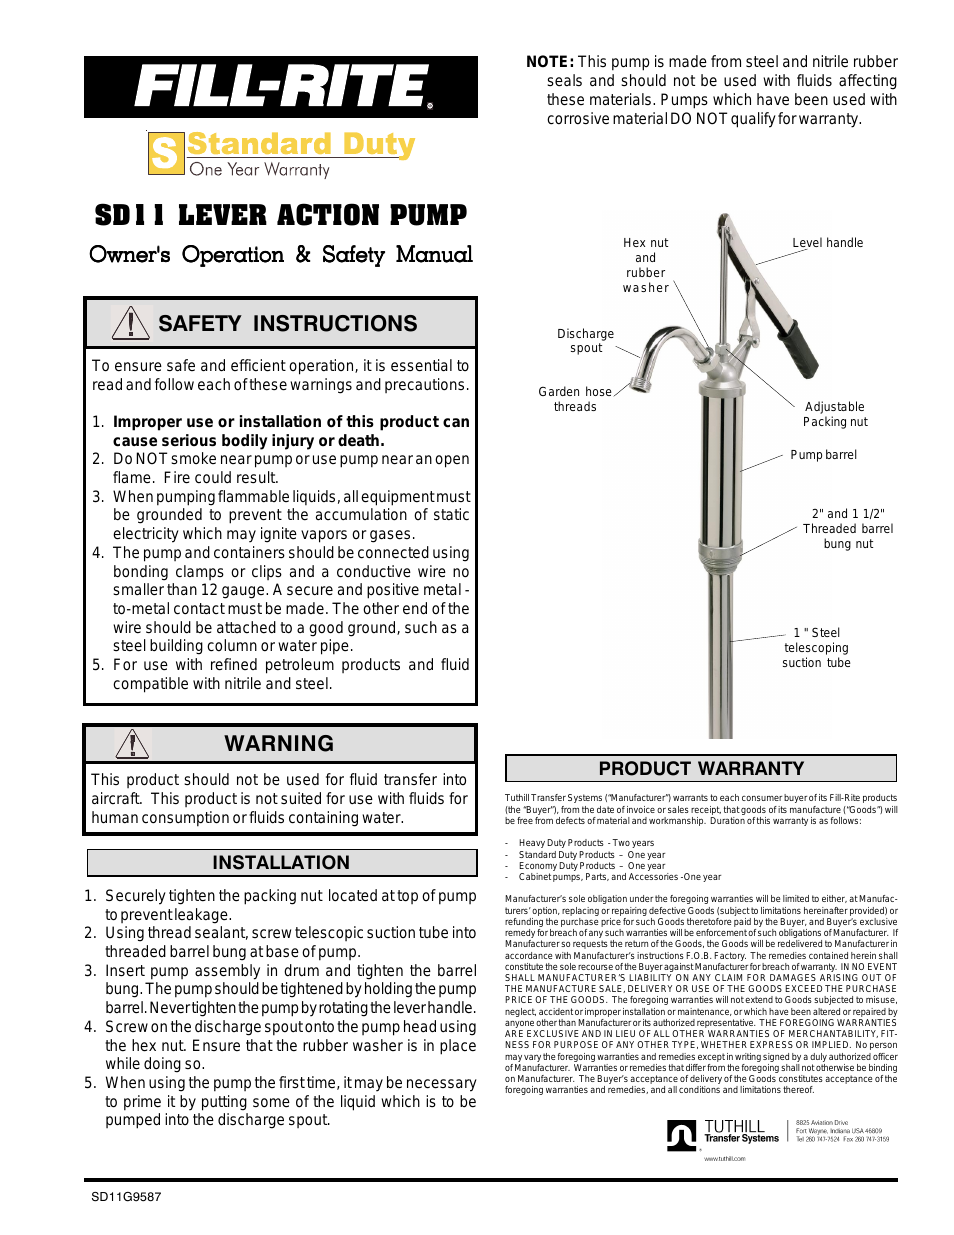 SD11 Lever Action Pump